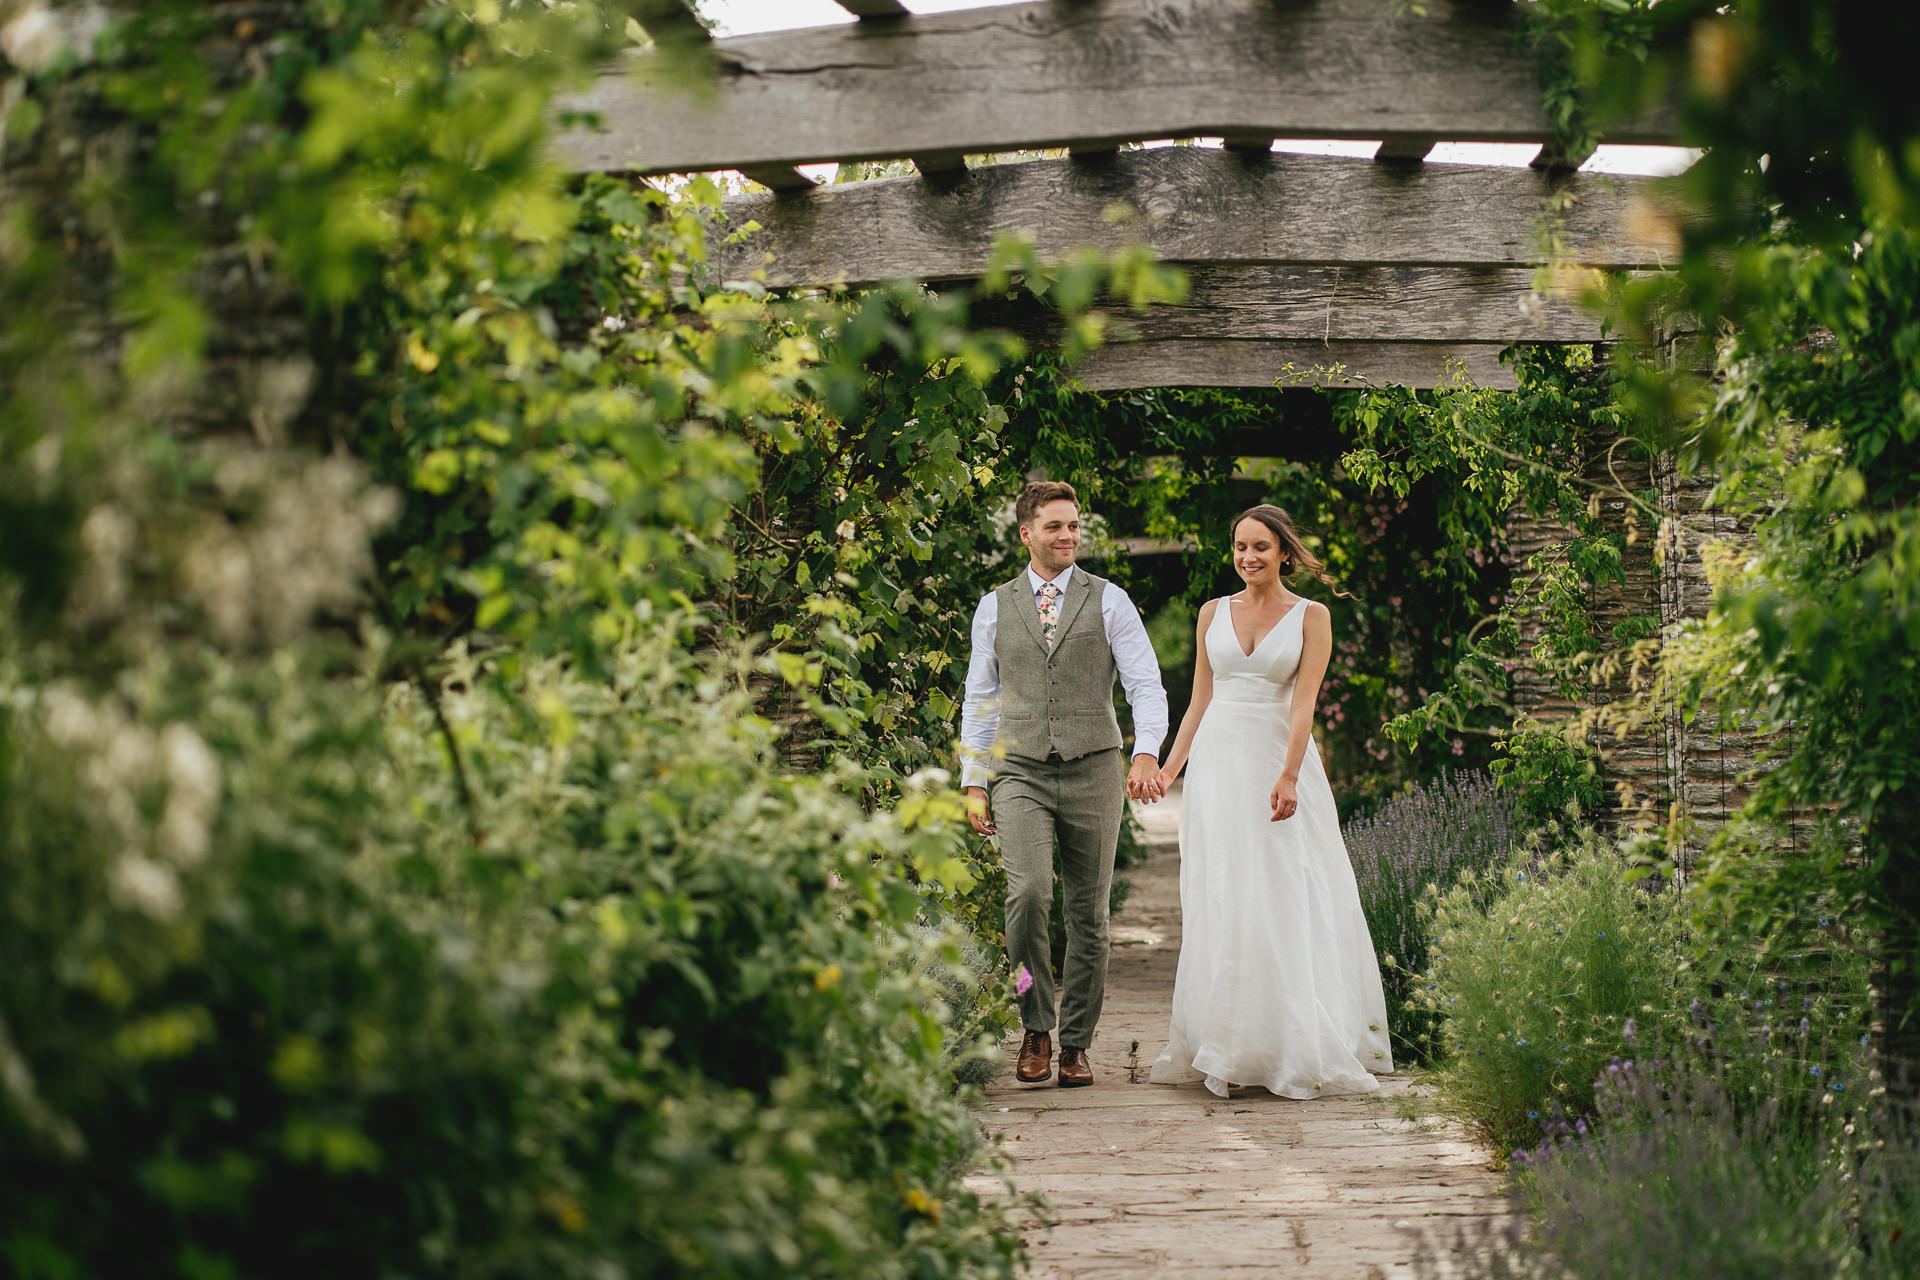 A bride and groom walking through Hestercombe Gardens smiling and talking together